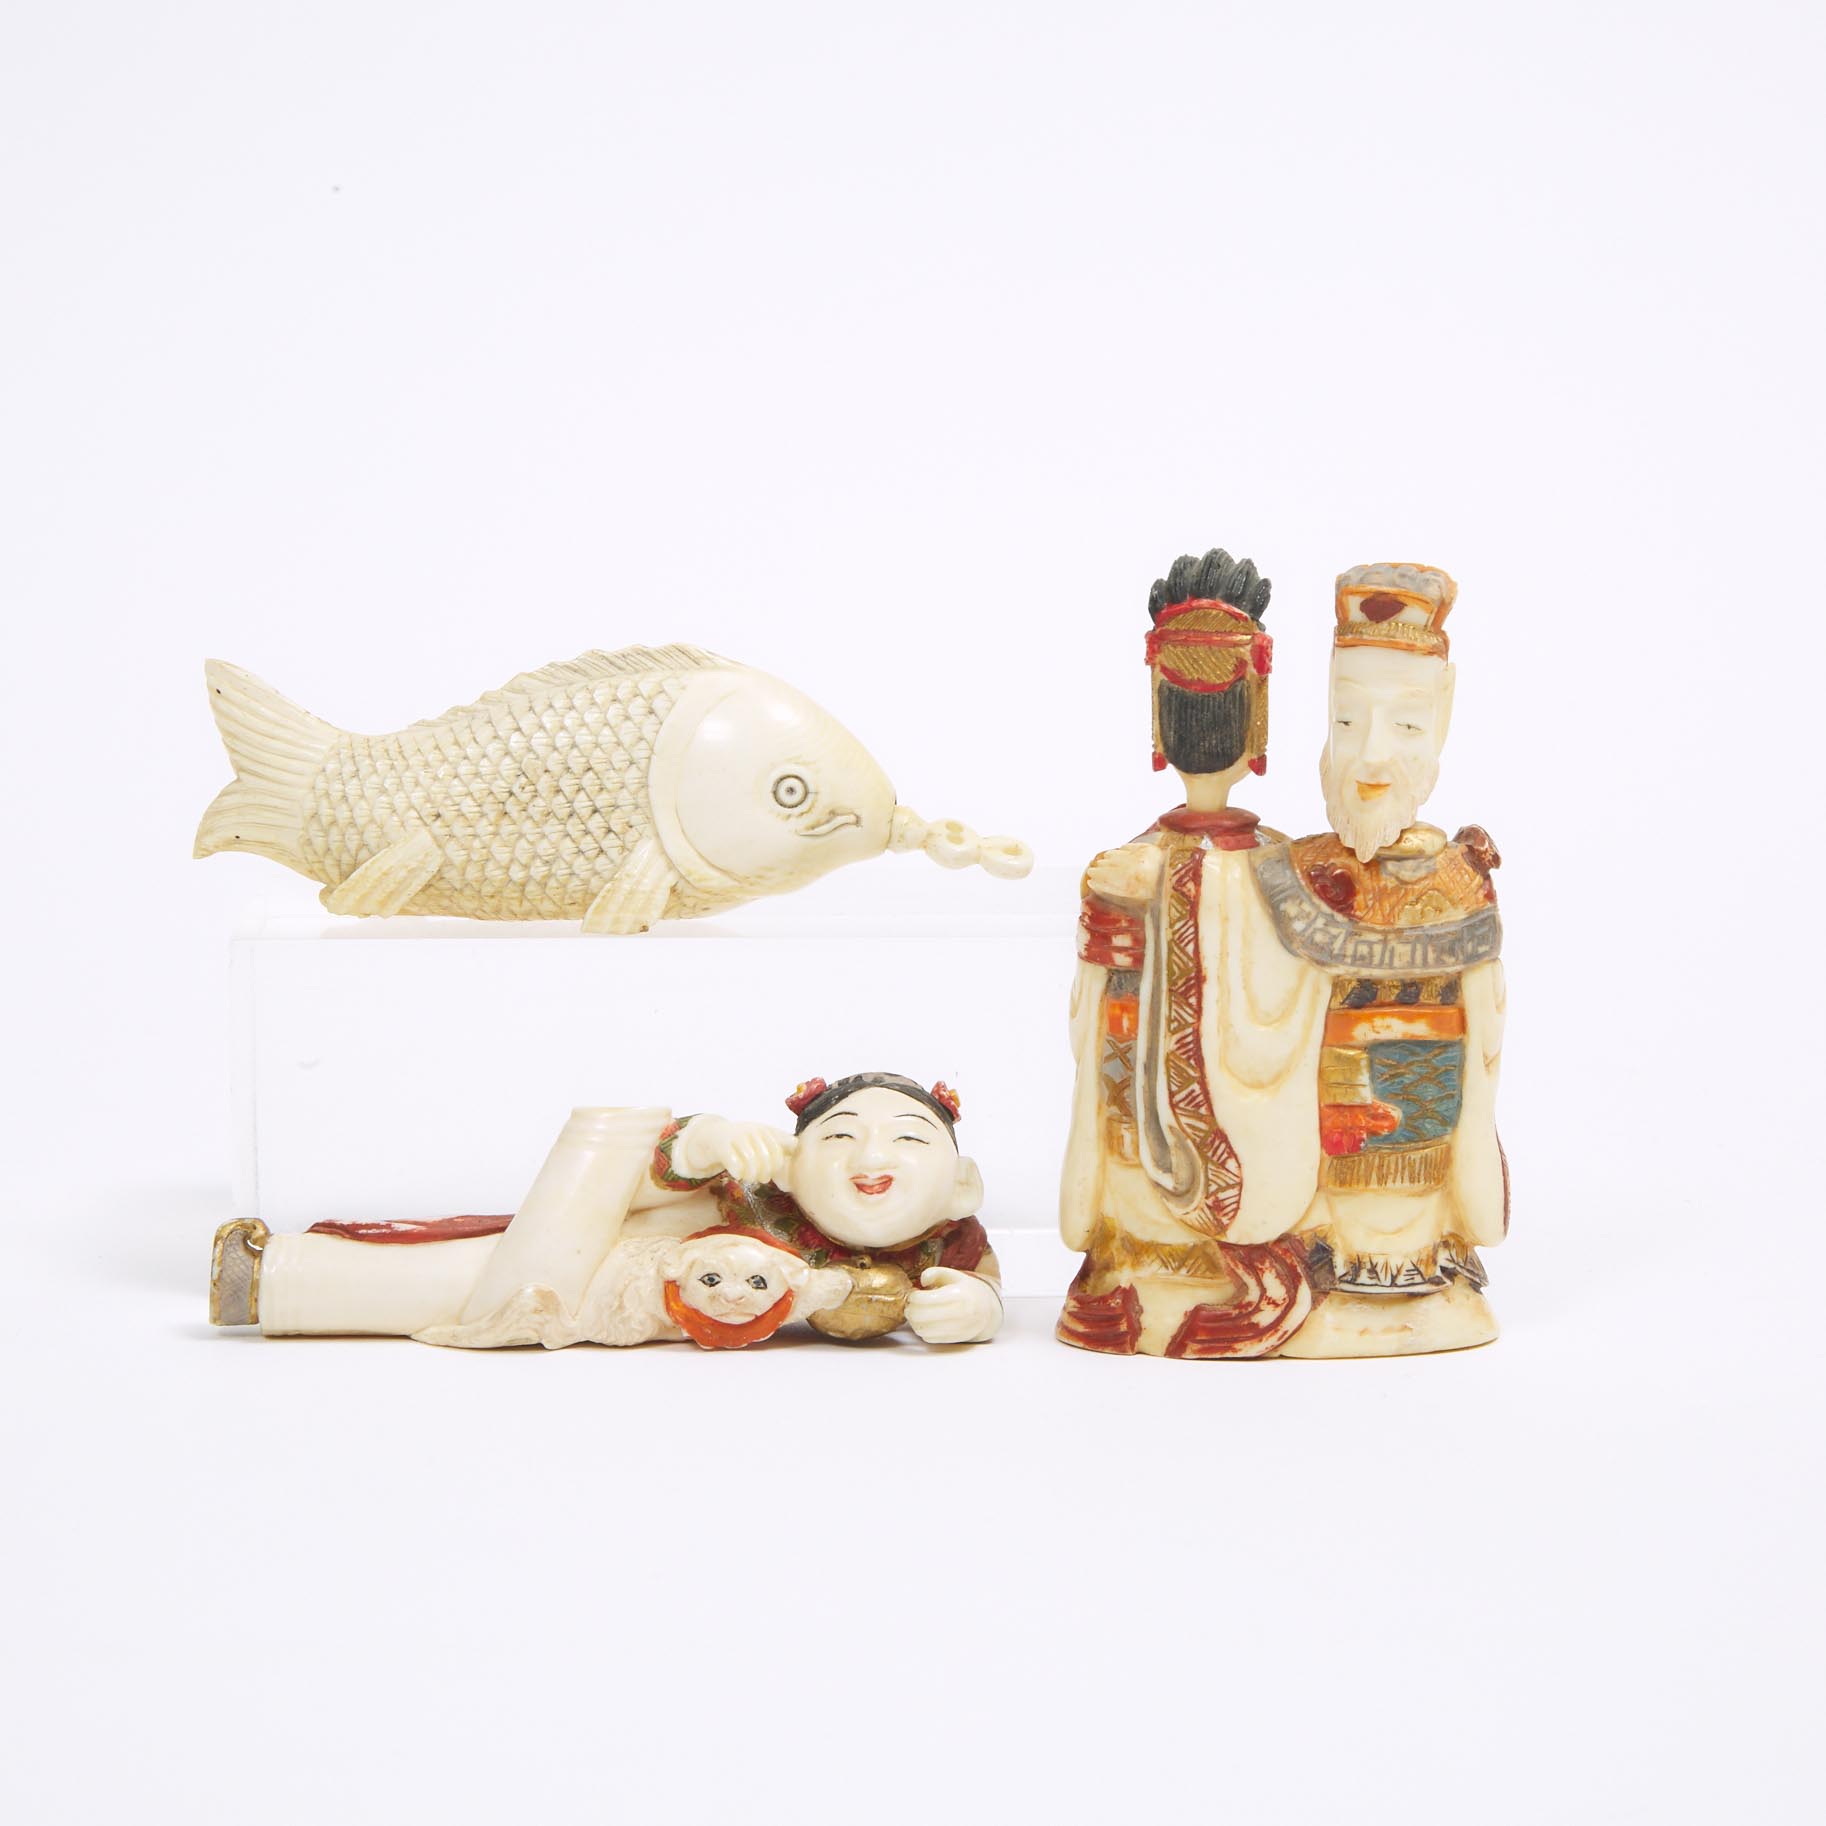 A Group of Three Ivory Snuff Bottles, Early 20th Century